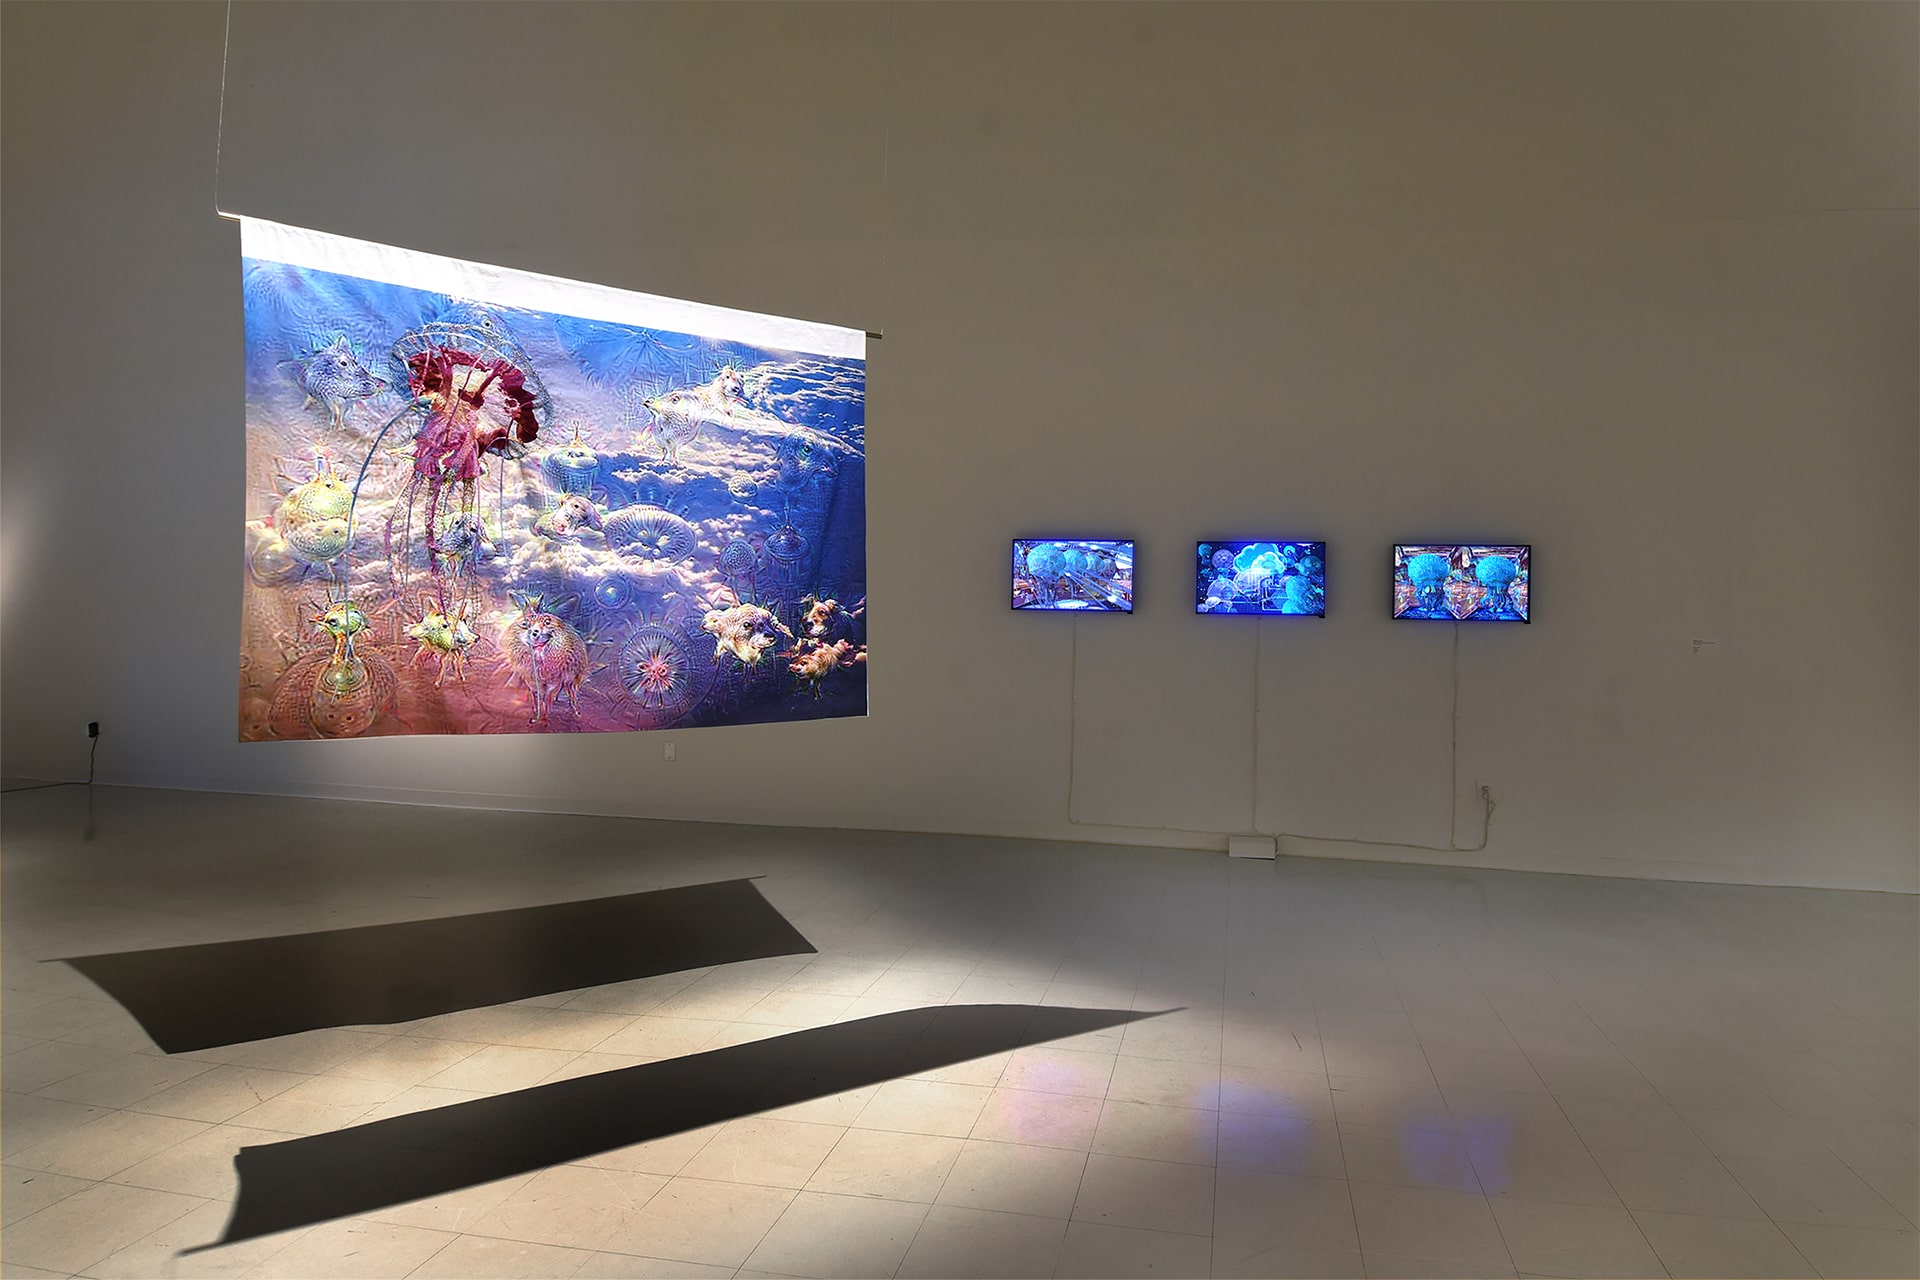 Untitled 1, large textile banner with hand embroidery of a jellyfish hanging from the ceiling next two three flatscreens on a wall